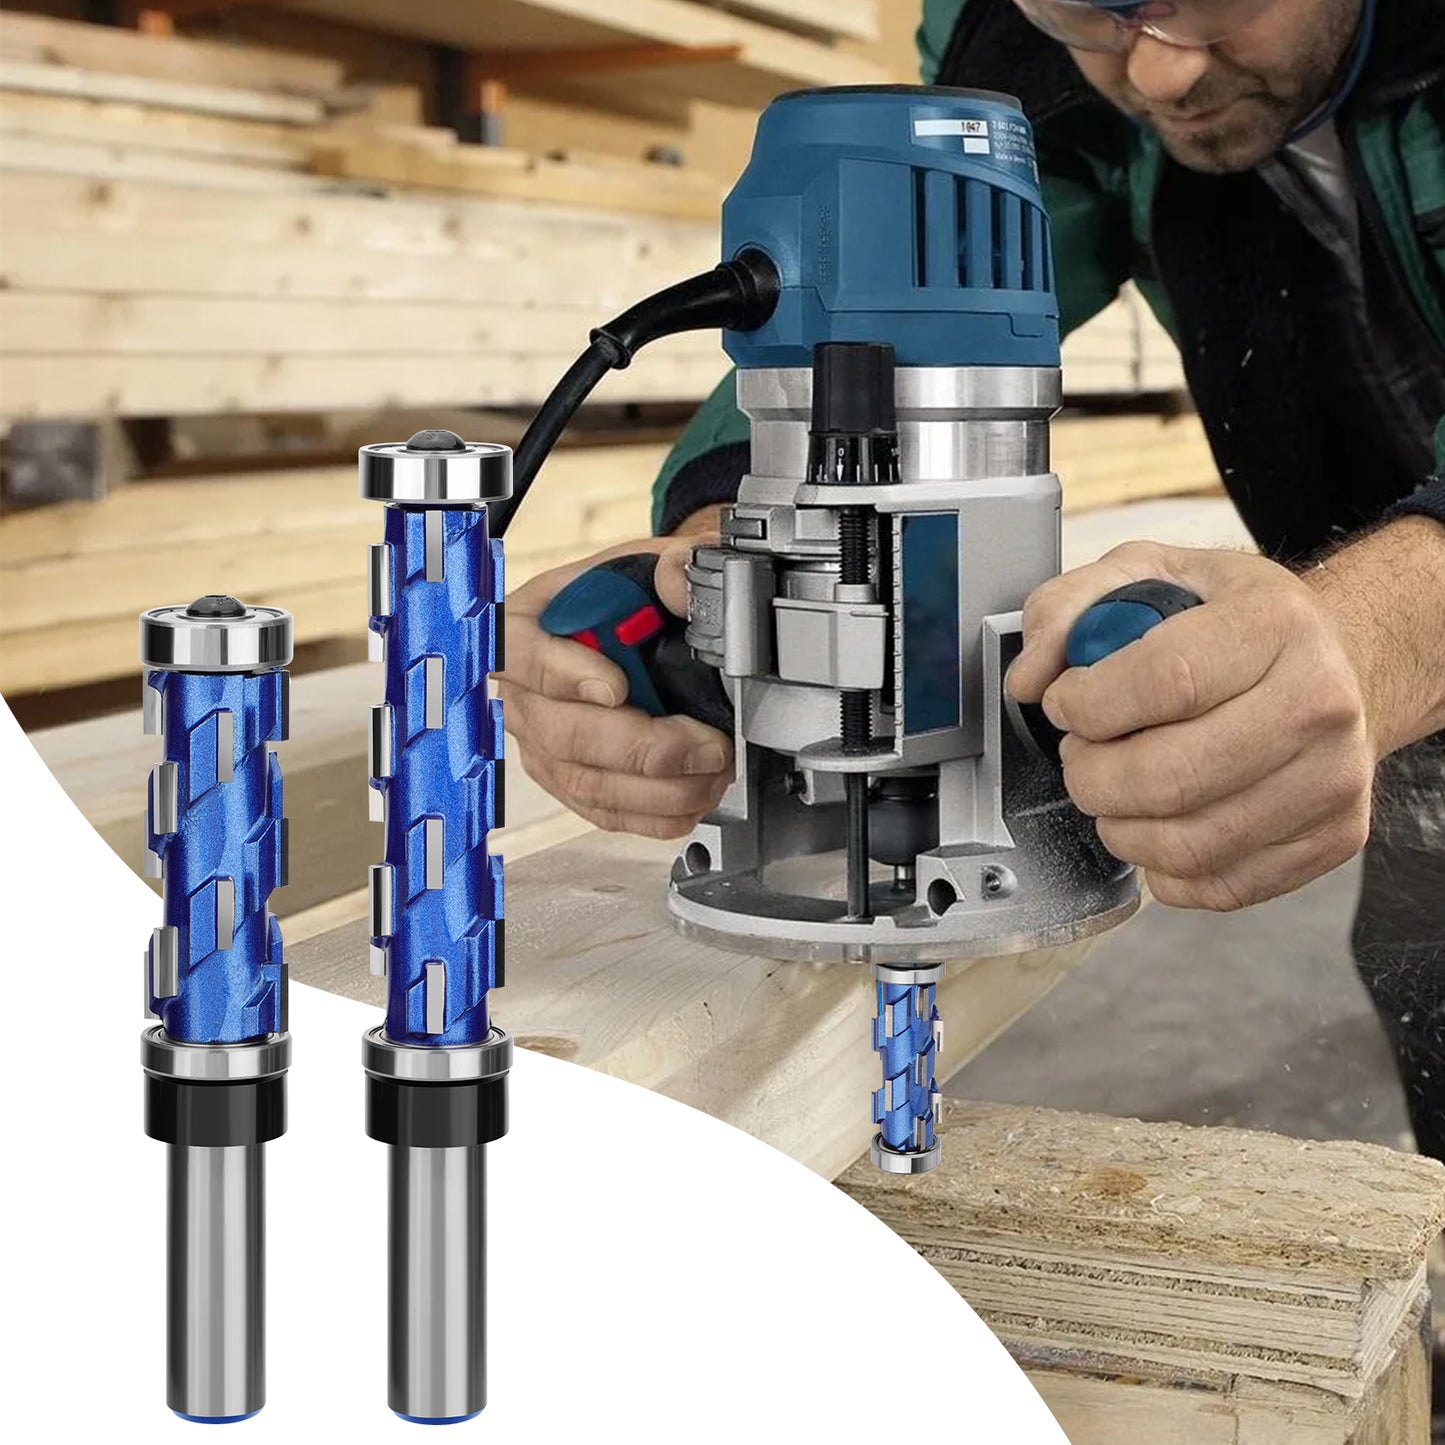 1/2'' Shank Flush Trim Router Bit 44.5mm - Durable, Precise Wood Trimming,Enhanced Efficiency with Multi-Blade Technology and Double Bearings ,Ideal for Wood Sanding Patterns and Edges on Multiple Surfaces